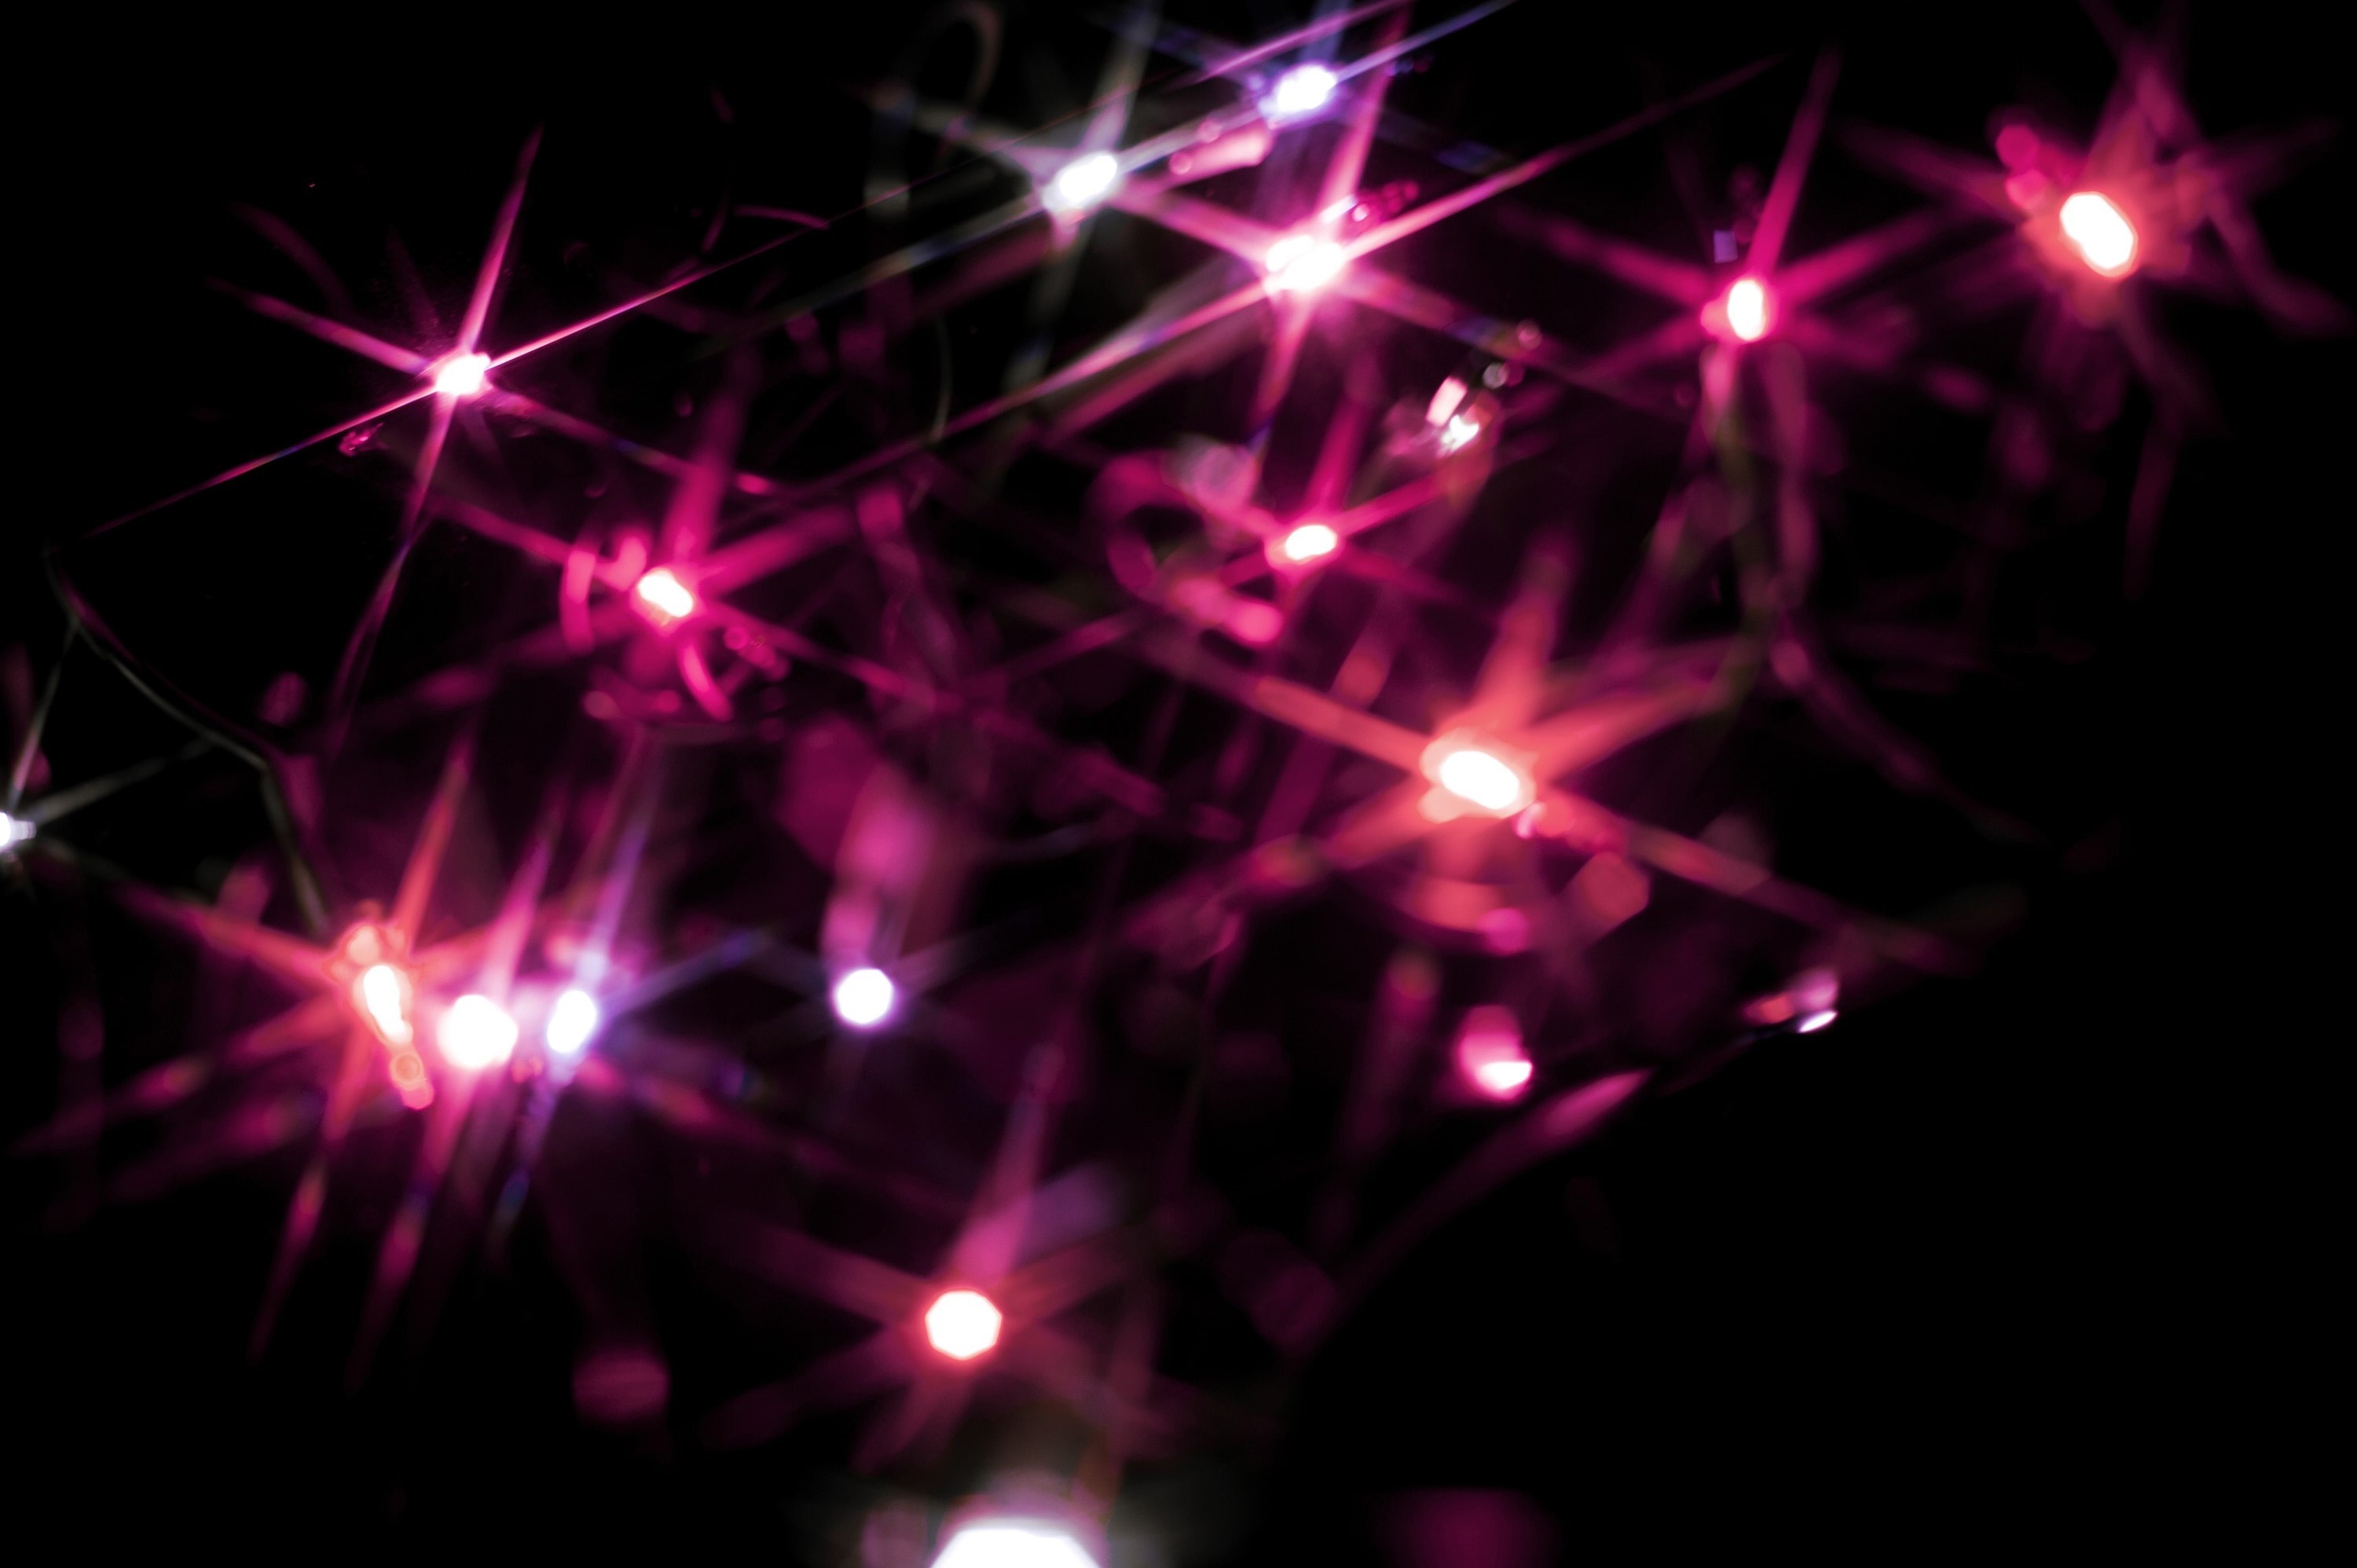 3000x1996 Christmas background of colourful vivid pink starburst lights scattered in  the darkness sparkling and glowing for